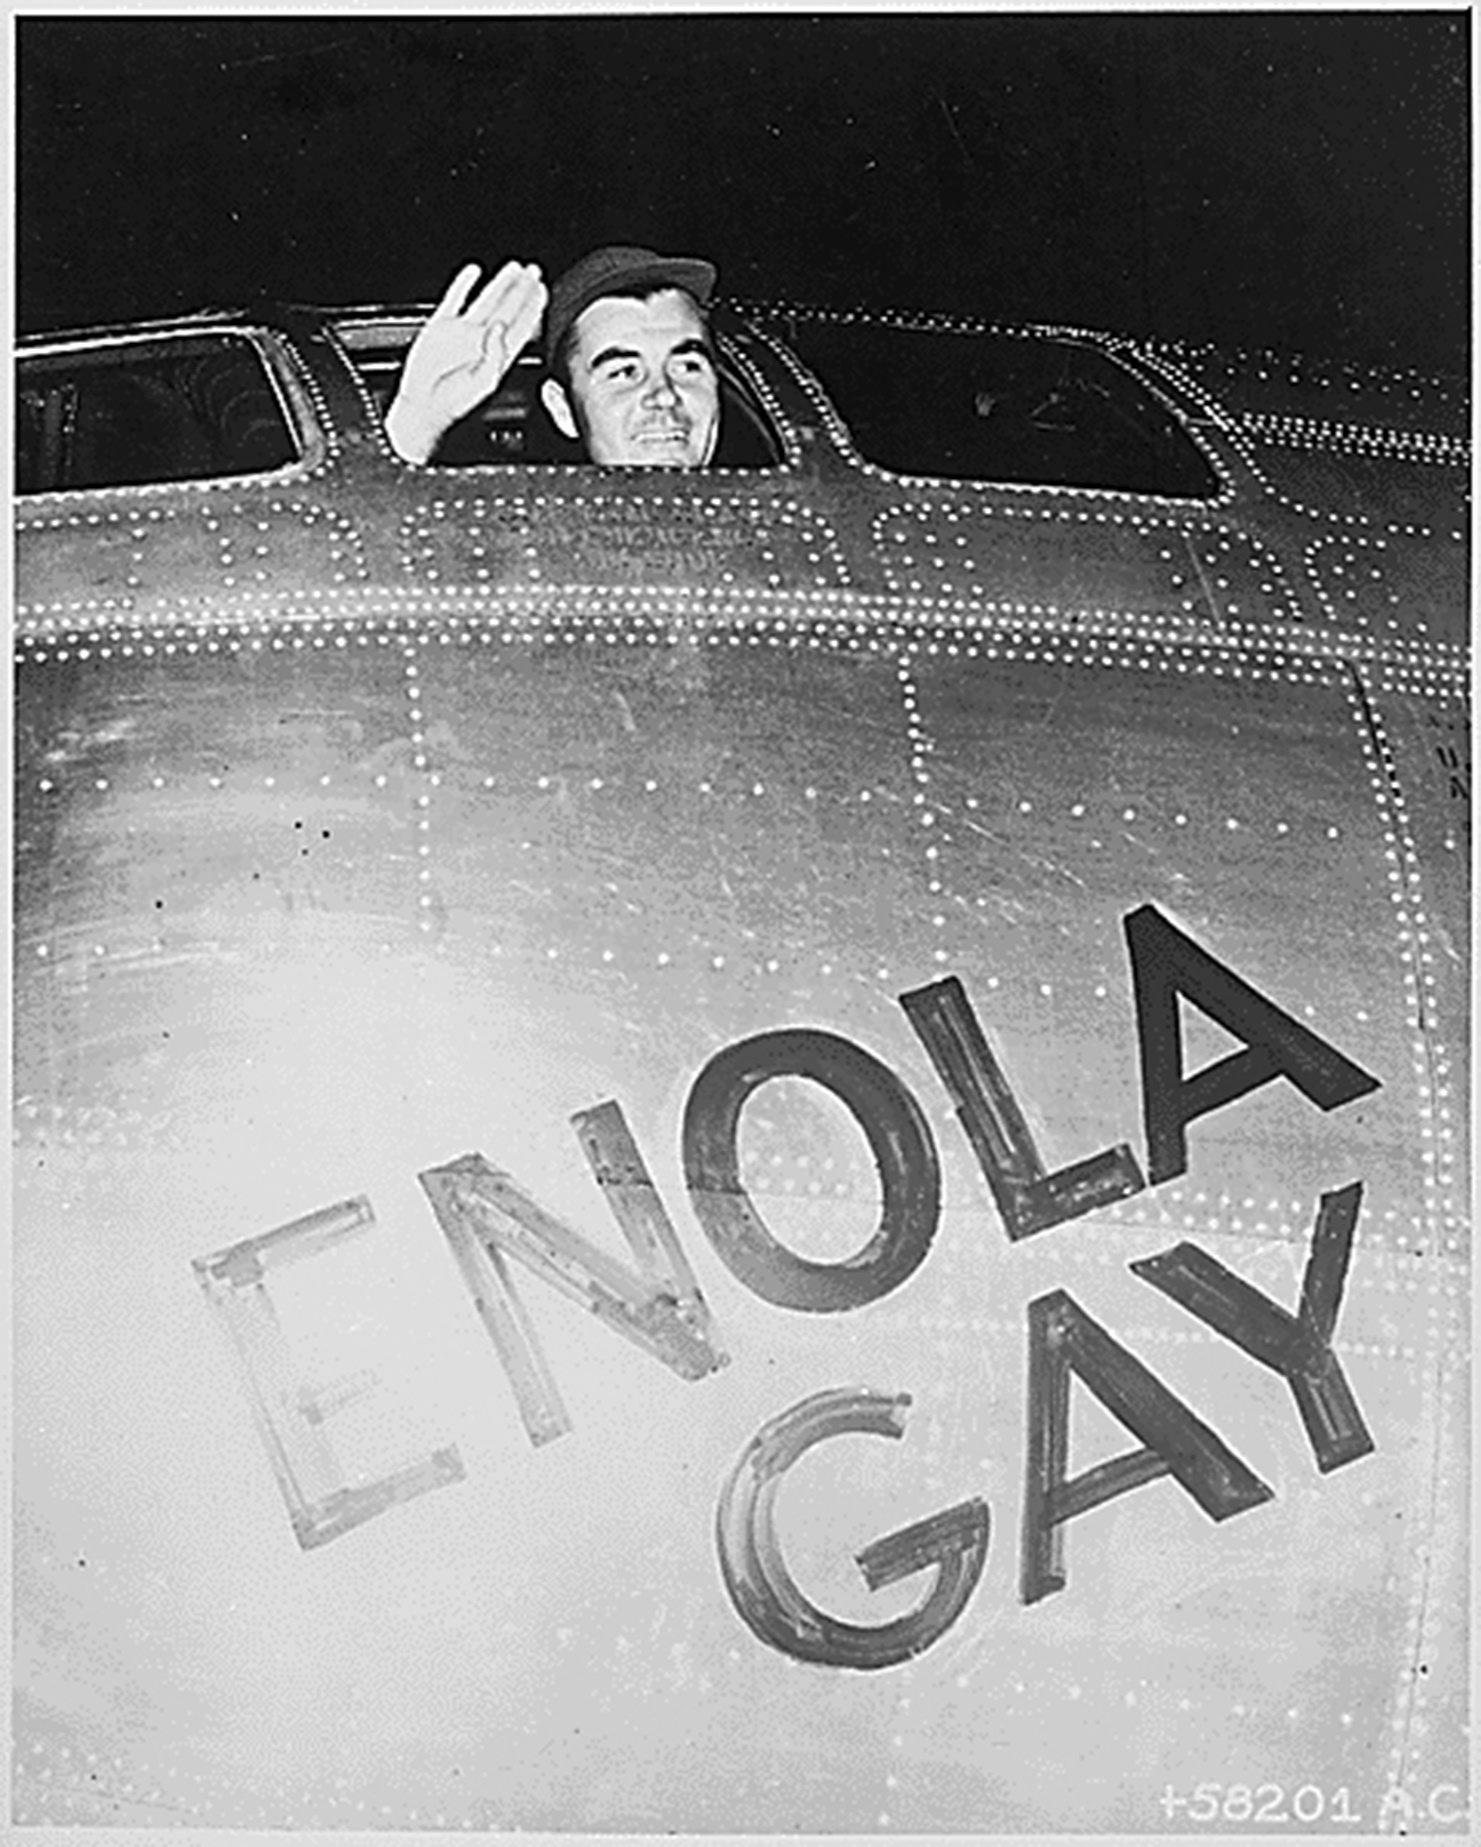 epa04867704 A handout image made available by the US National Archive of Colonel Paul W. Tibbets, Jr., Pilot of the Enola Gay, the Plane that Dropped the Atomic Bomb on Hiroshima, waving from his cockpit before the takeoff, on Tinian island, 06 August 1945. 06 August 2015 marks the 70th anniversary of the atomic bombing on Hiroshima. The US B-29 Superfortress bomber Enola Gay dropped an atomic bomb codenamed 'Little Boy' on Hiroshima on 06 August 1945, killing tens of thousands of people in seconds. By the end of the year, 140,000 people had died from the effects of the bomb. On 09 August 1945 a second atomic bomb was exploded over Nagasaki, killing more than 73,000 people. The 'Little Boy' was the first ever nuclear bomb dropped on a city and a crucial turn that led to Japan's surrender in WWII.  EPA/US NATIONAL ARCHIVE / HANDOUT  HANDOUT EDITORIAL USE ONLY